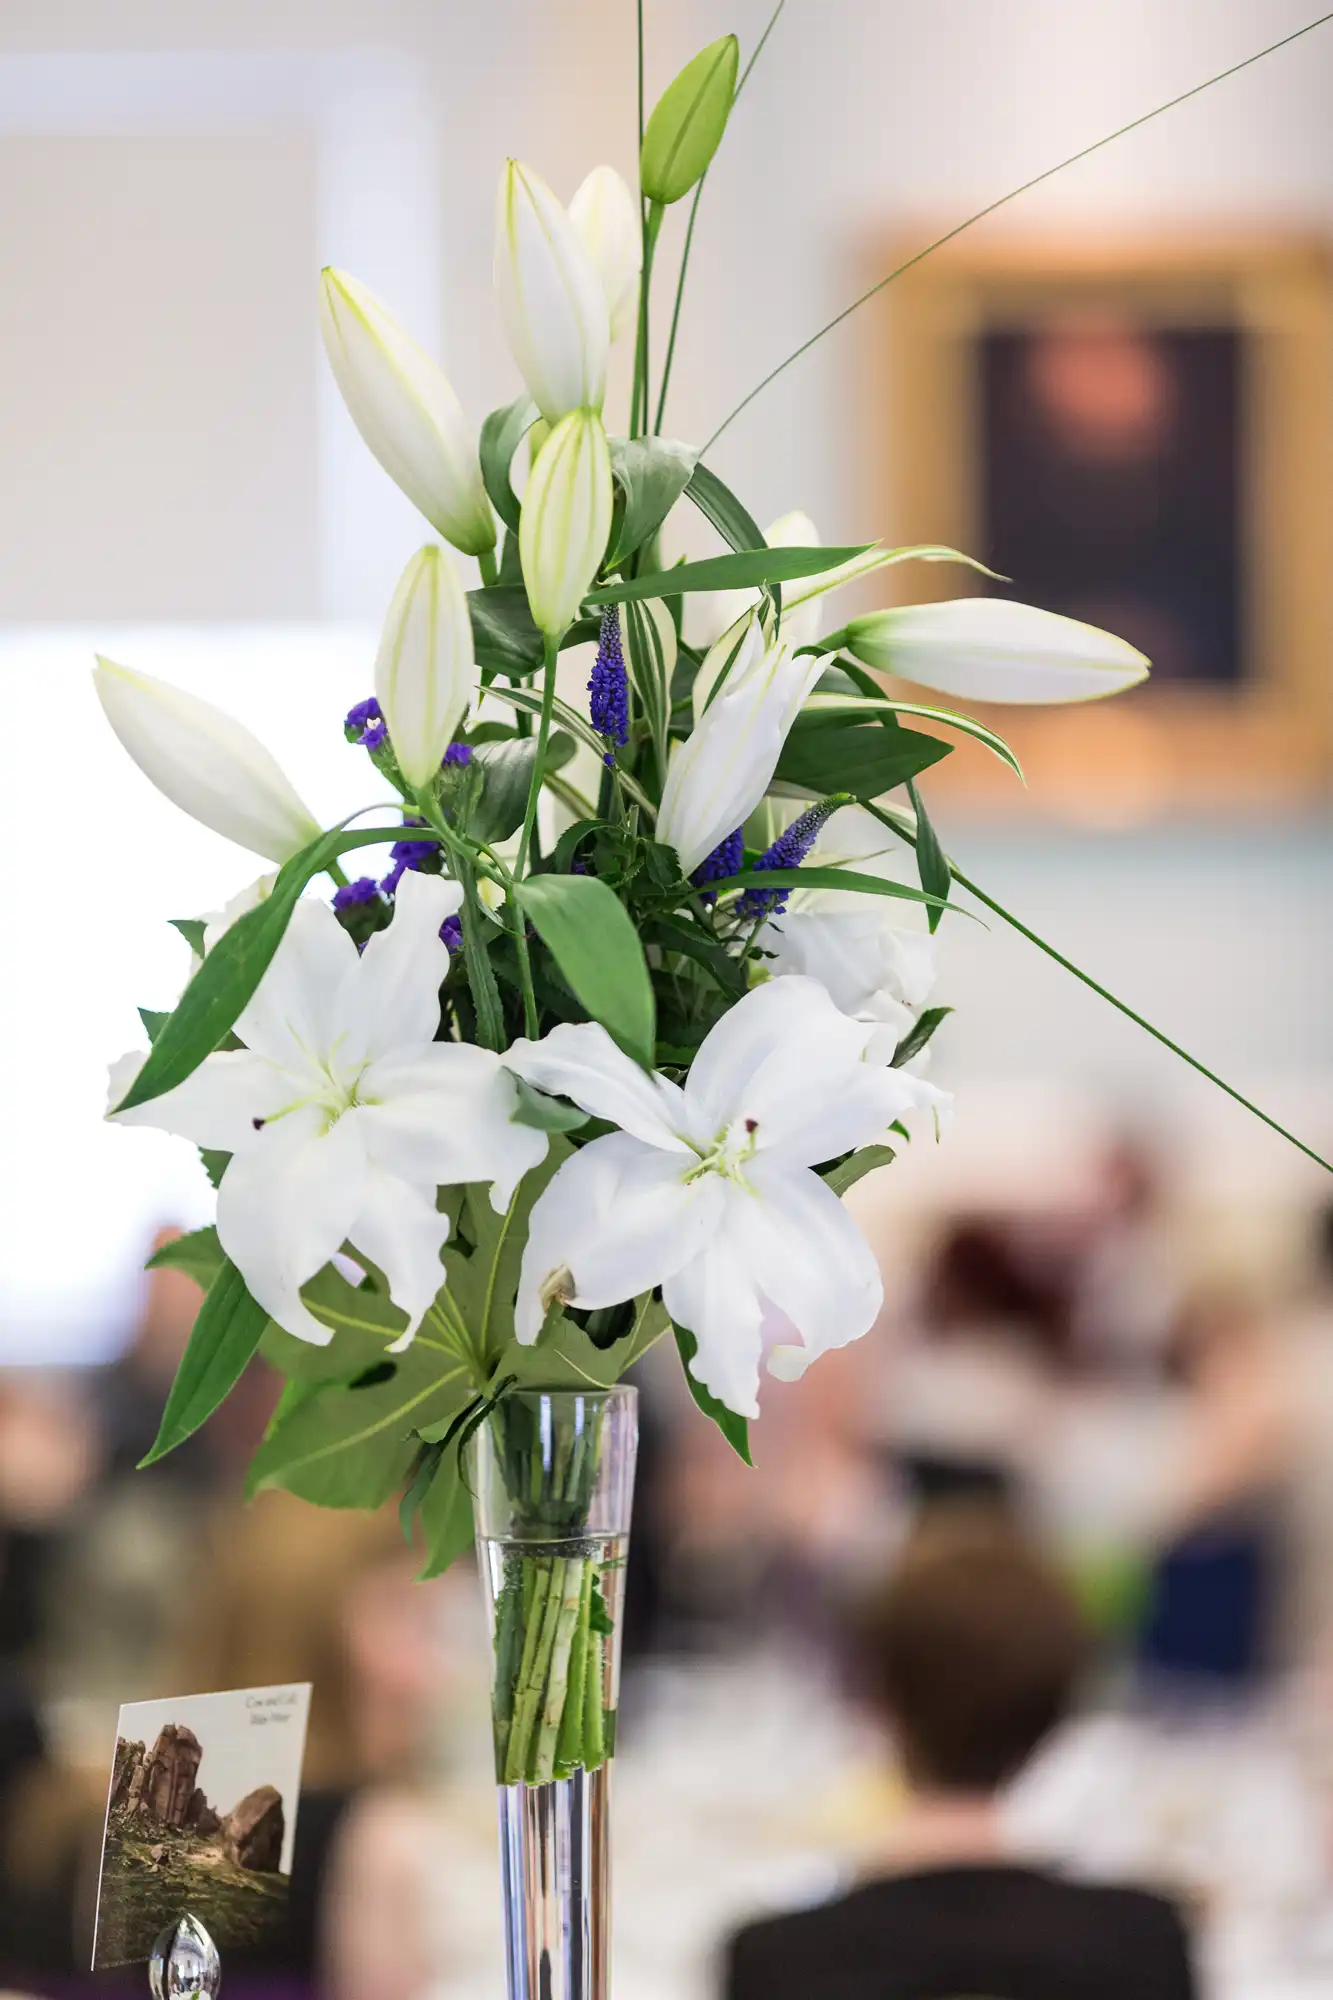 A tall vase filled with white lilies and purple flowers on a blurred background of a banquet hall setting.